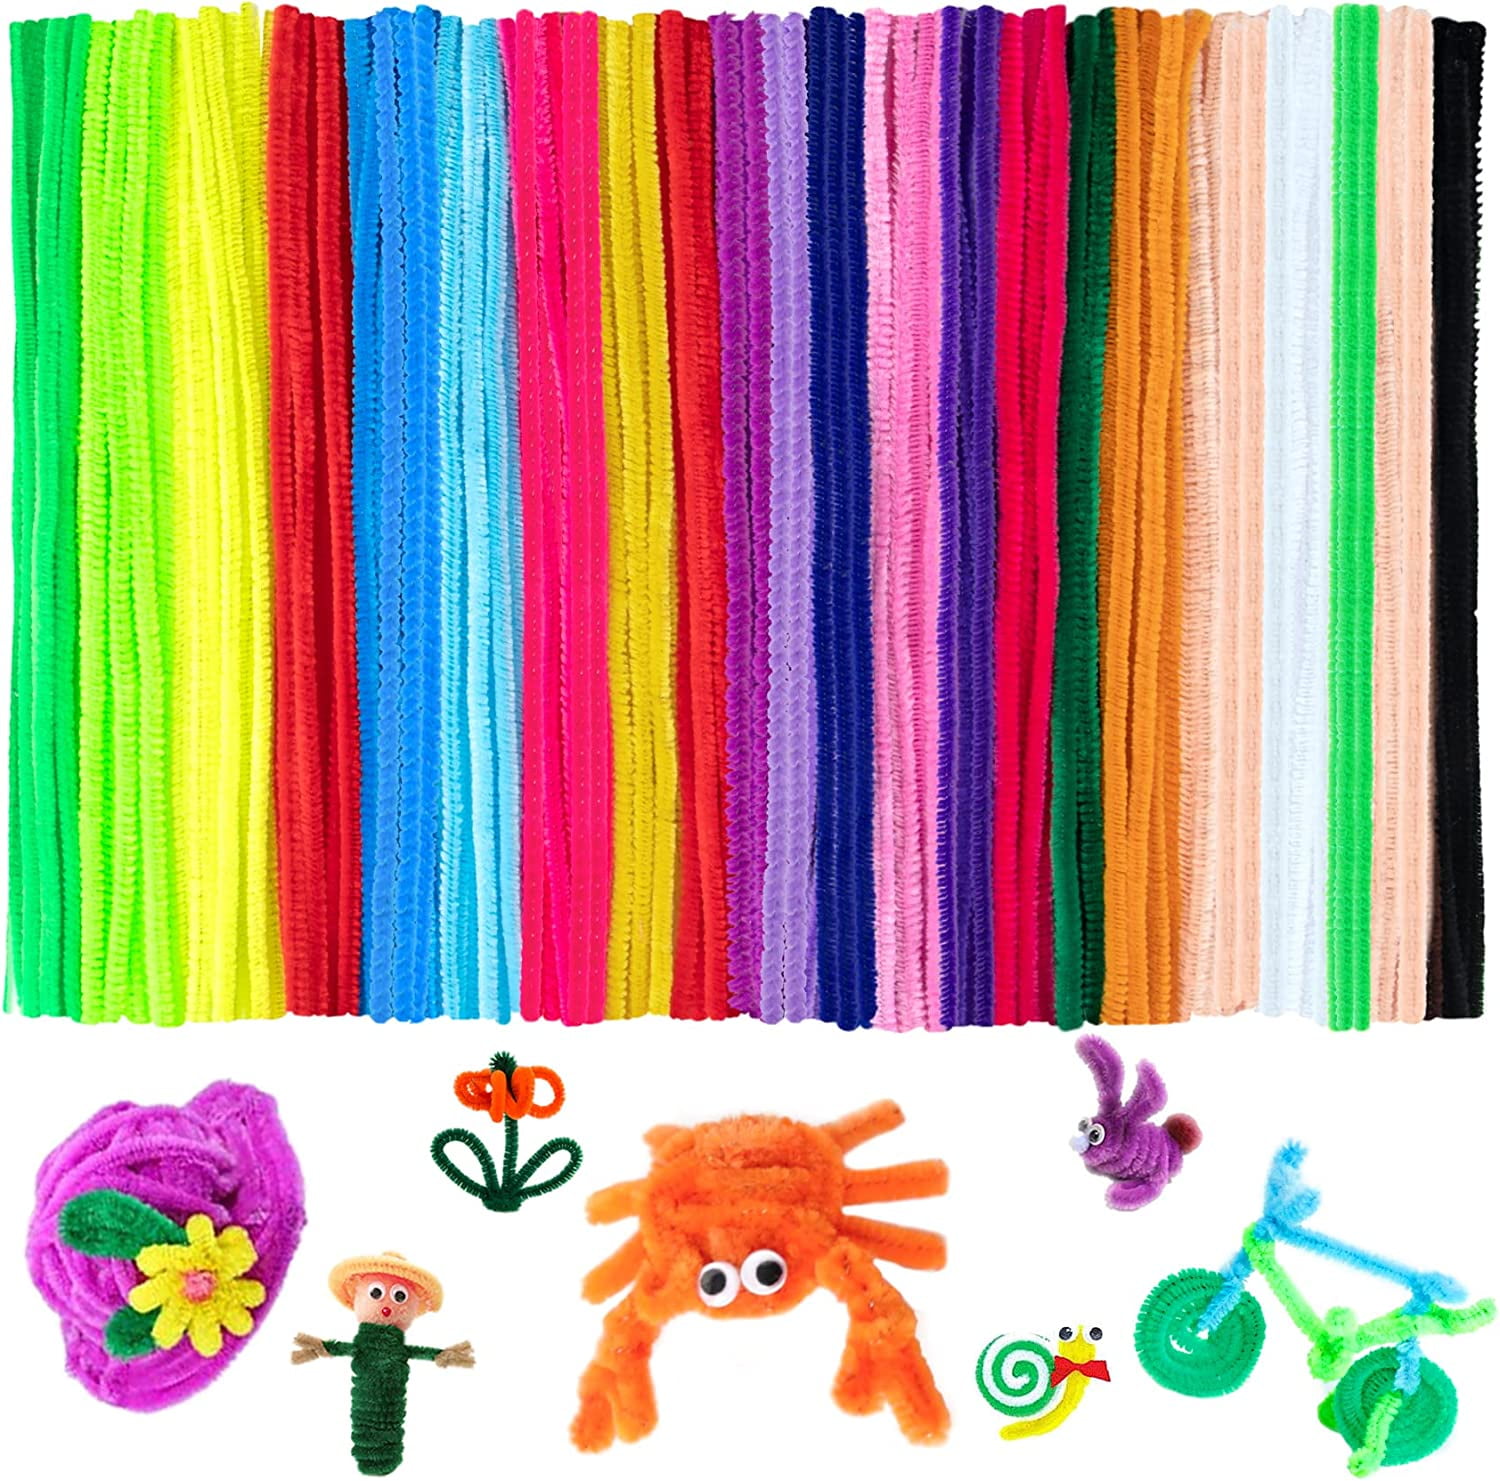 Eppingwin 200 Pcs Pipe Cleaners, Multi-Colored Pipe Cleaners Craft Supplies, 20 Colors Chenille Stems for DIY Arts Crafts Project(Multi Color)